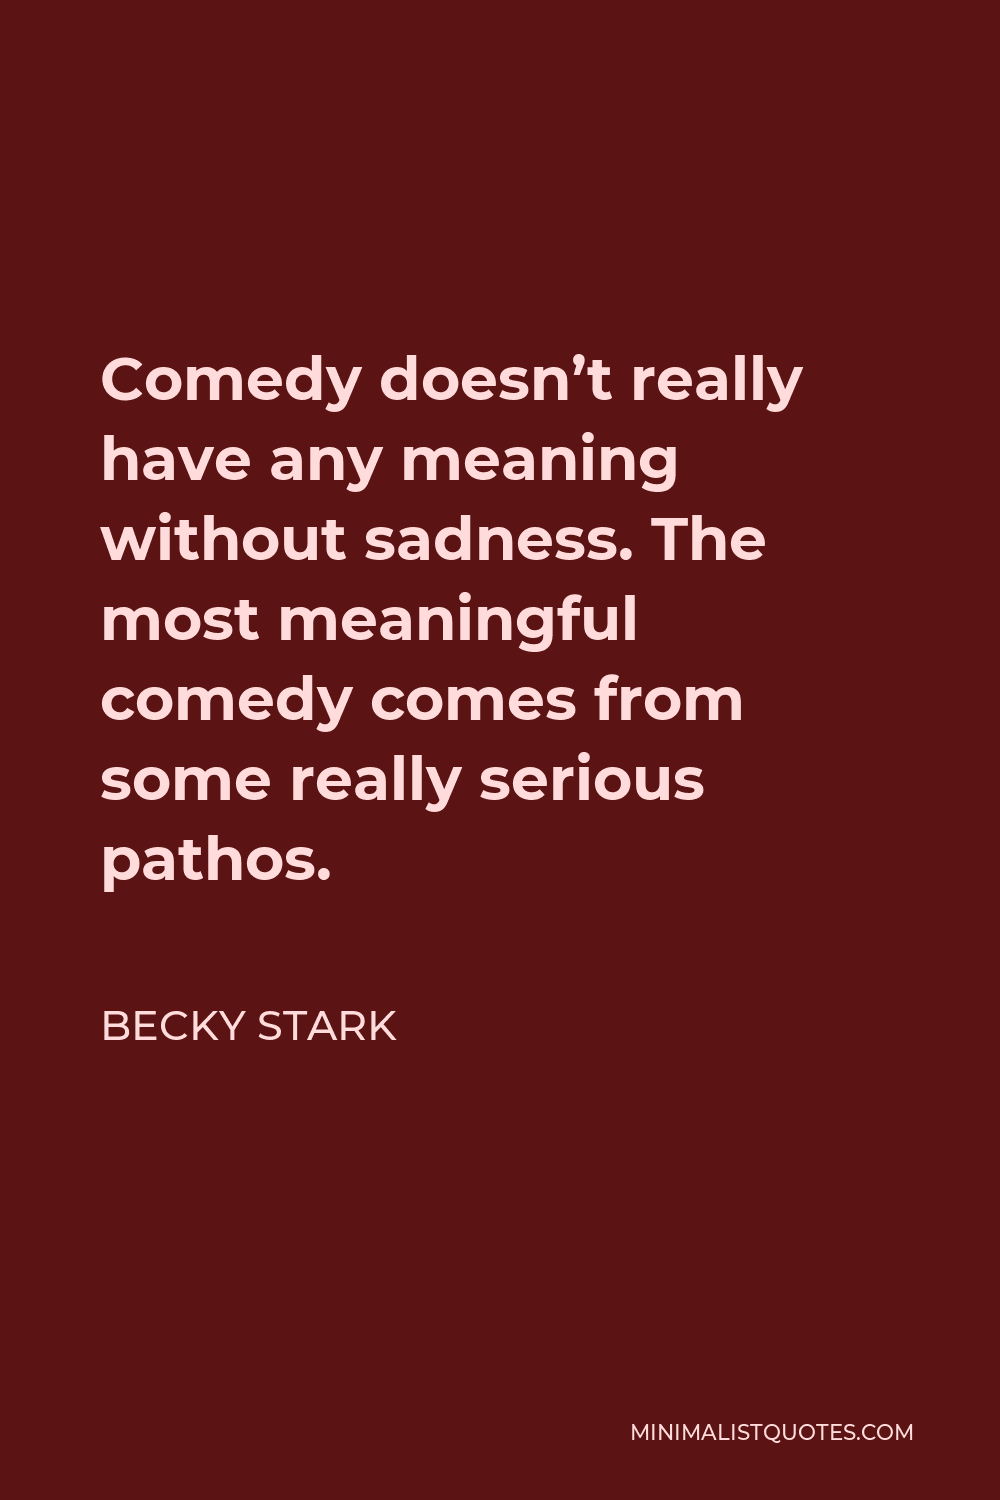 Becky Stark Quote - Comedy doesn’t really have any meaning without sadness. The most meaningful comedy comes from some really serious pathos.